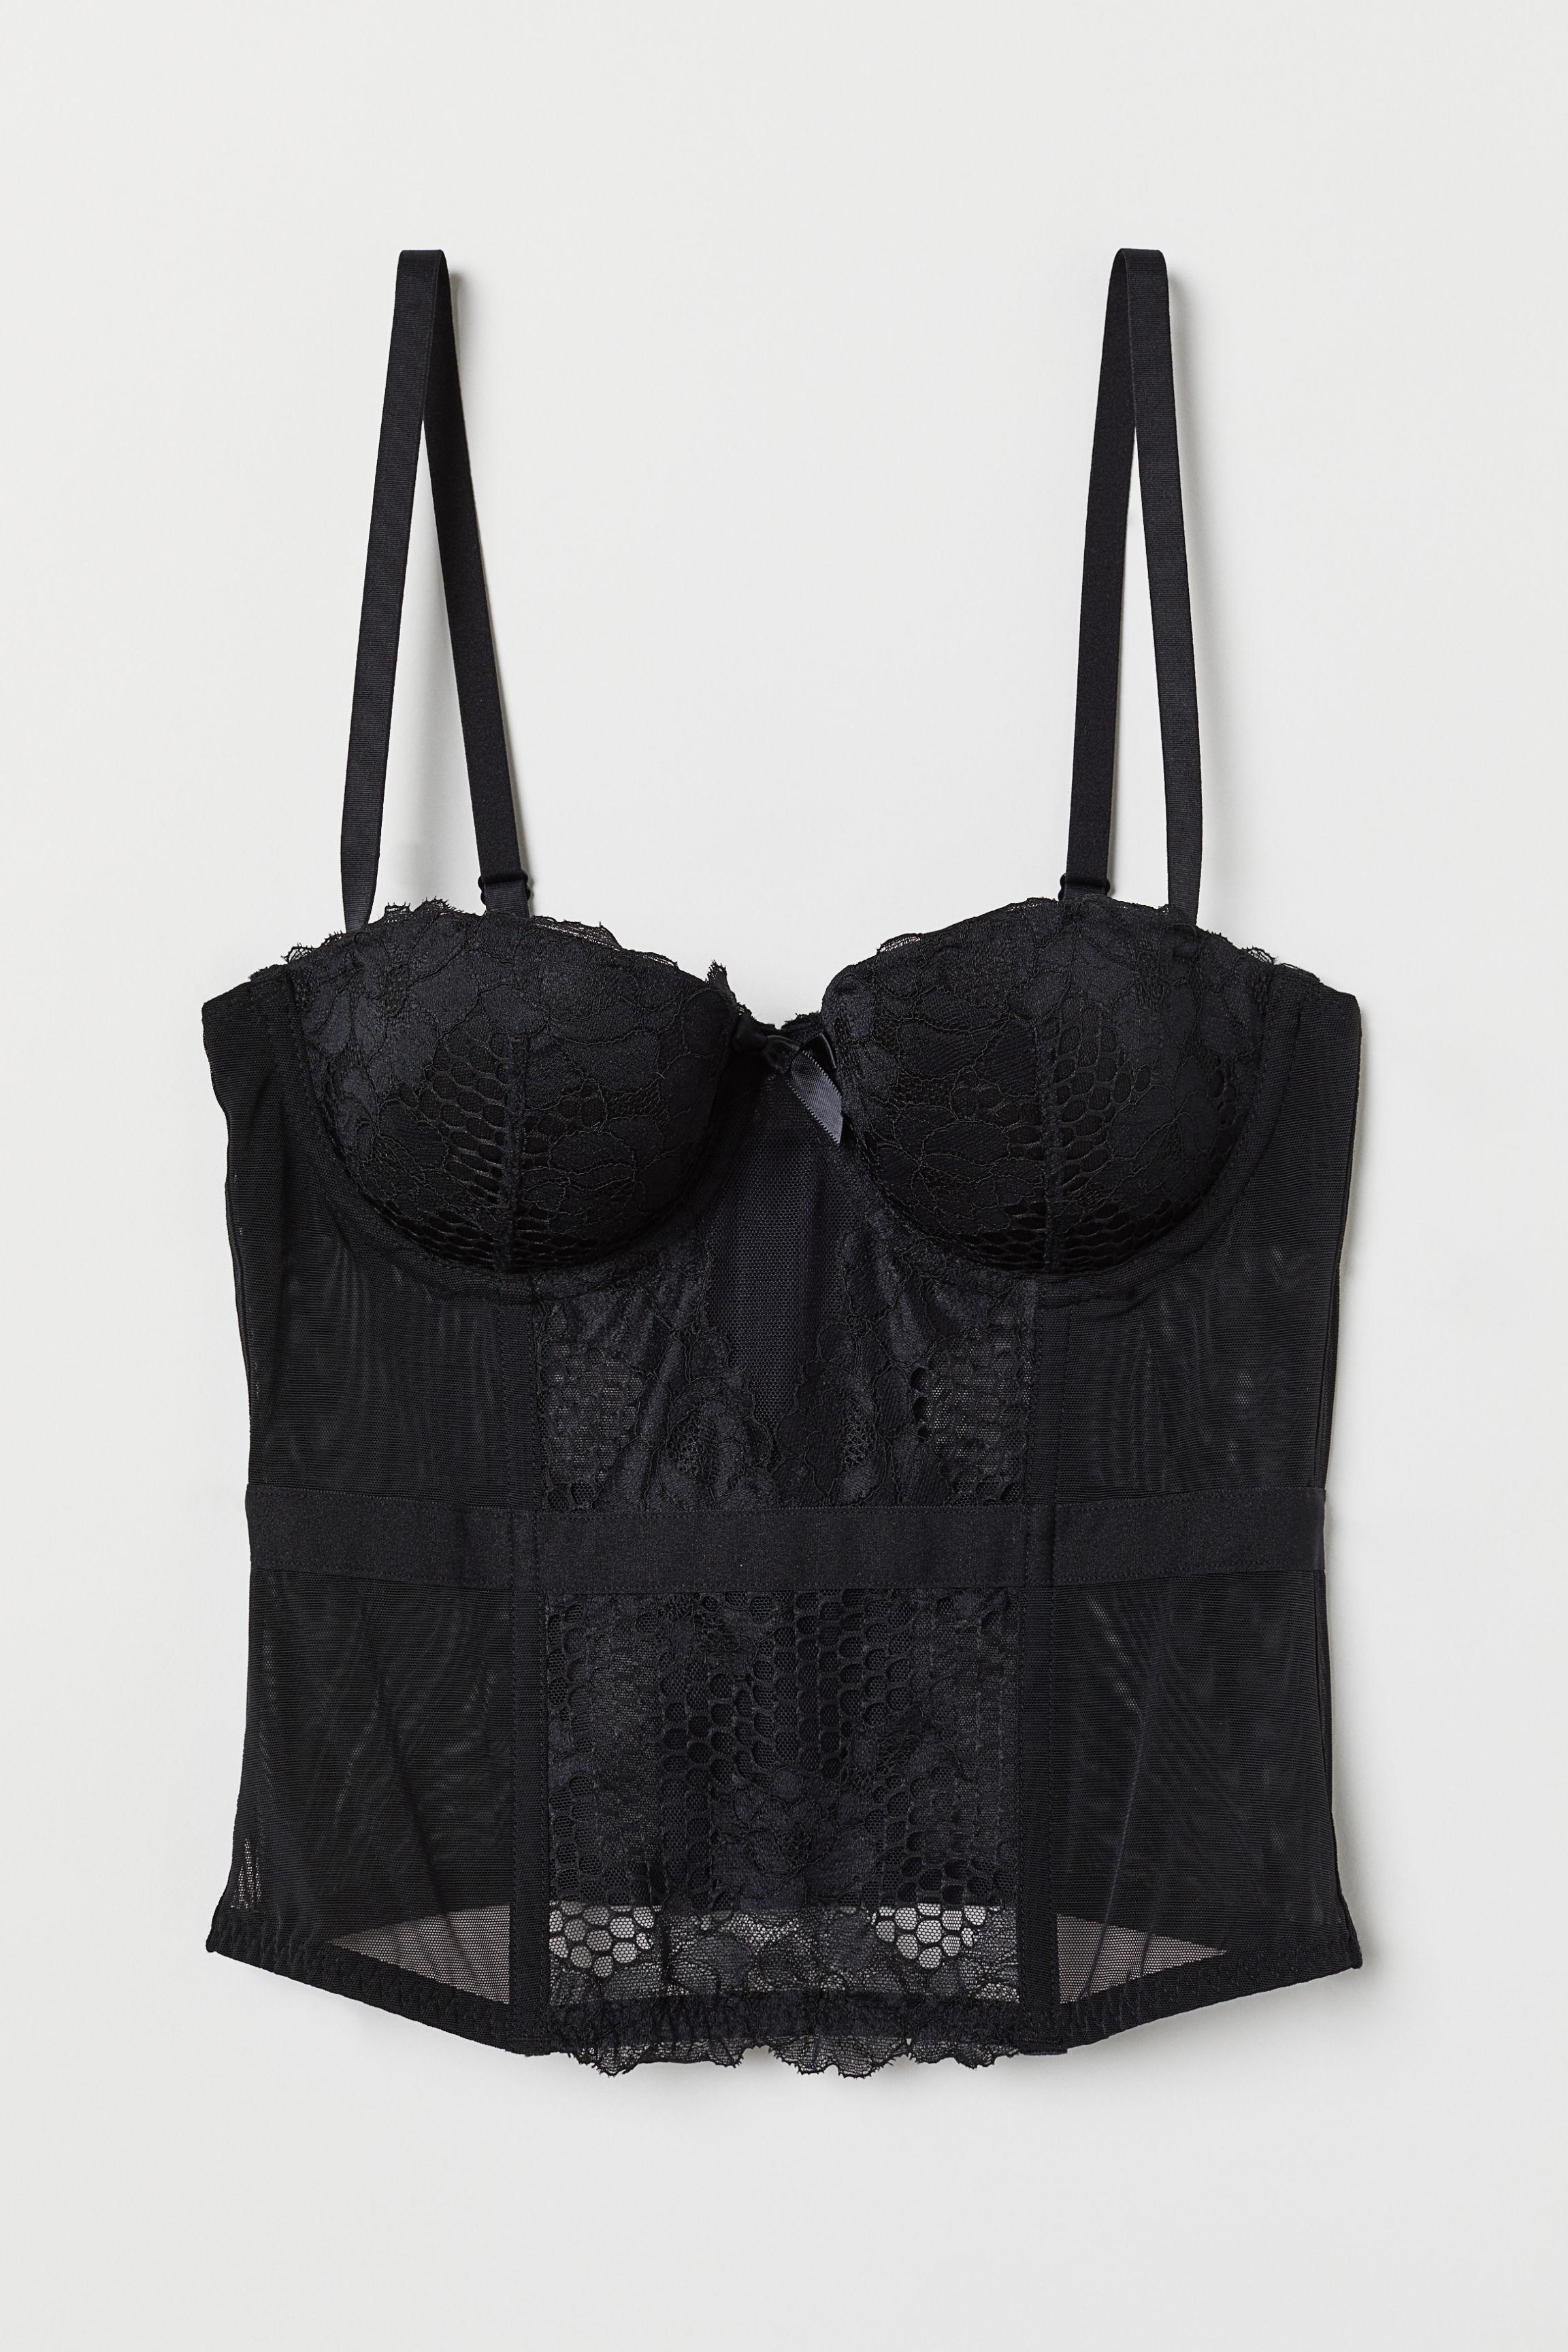 H&M Corset With A Balconette Bra in Black | Lyst